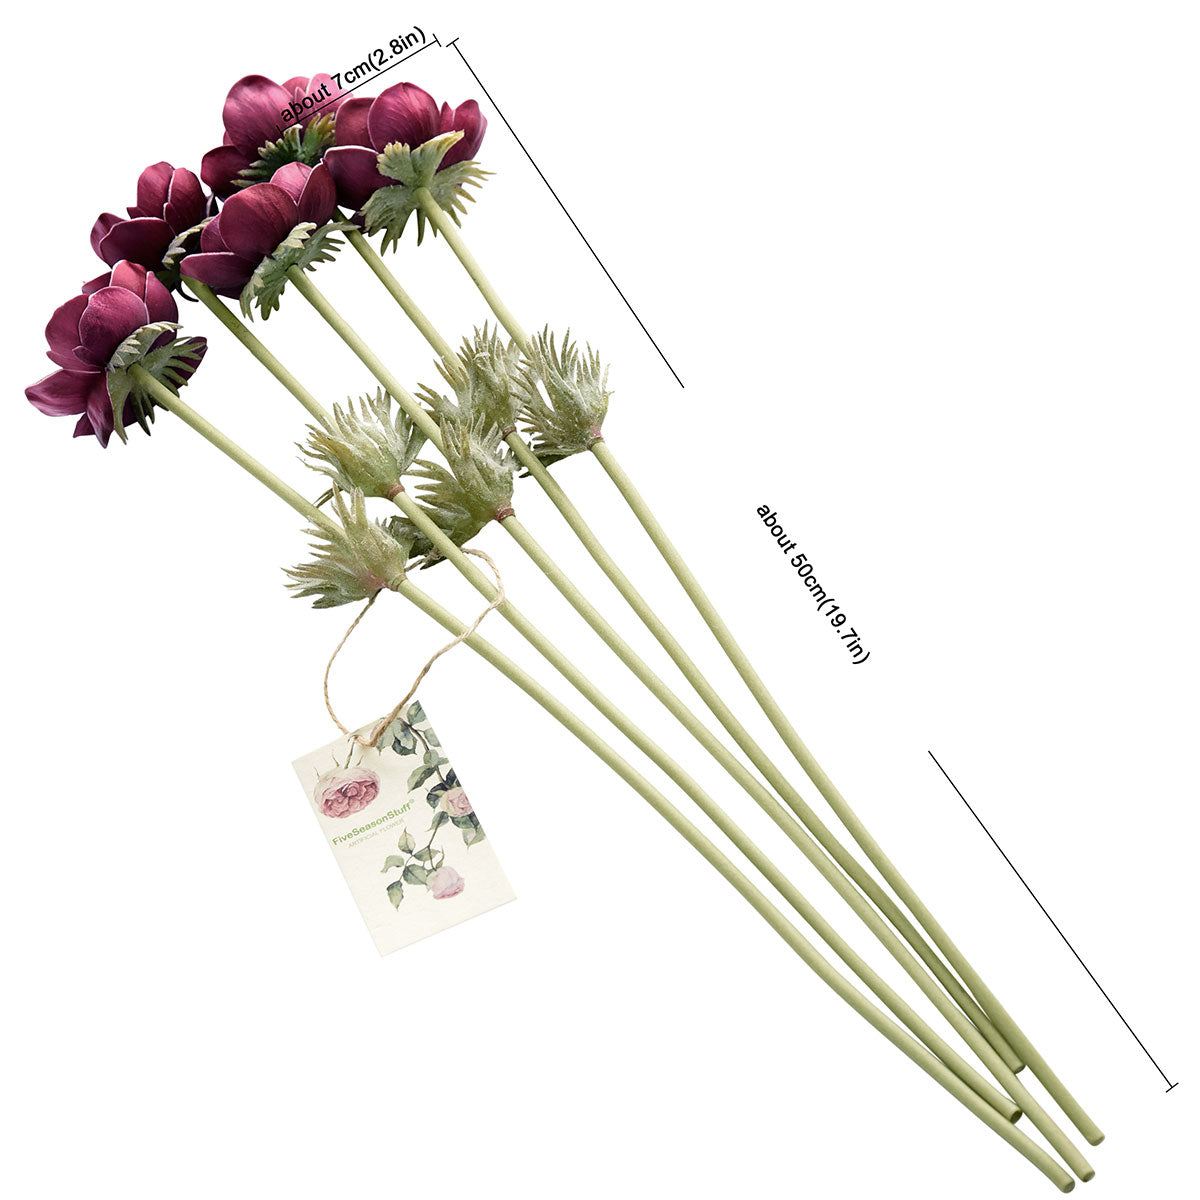 5 Long Stems (Deep Red Wine) Anemone ‘Real Touch’ Artificial Flower